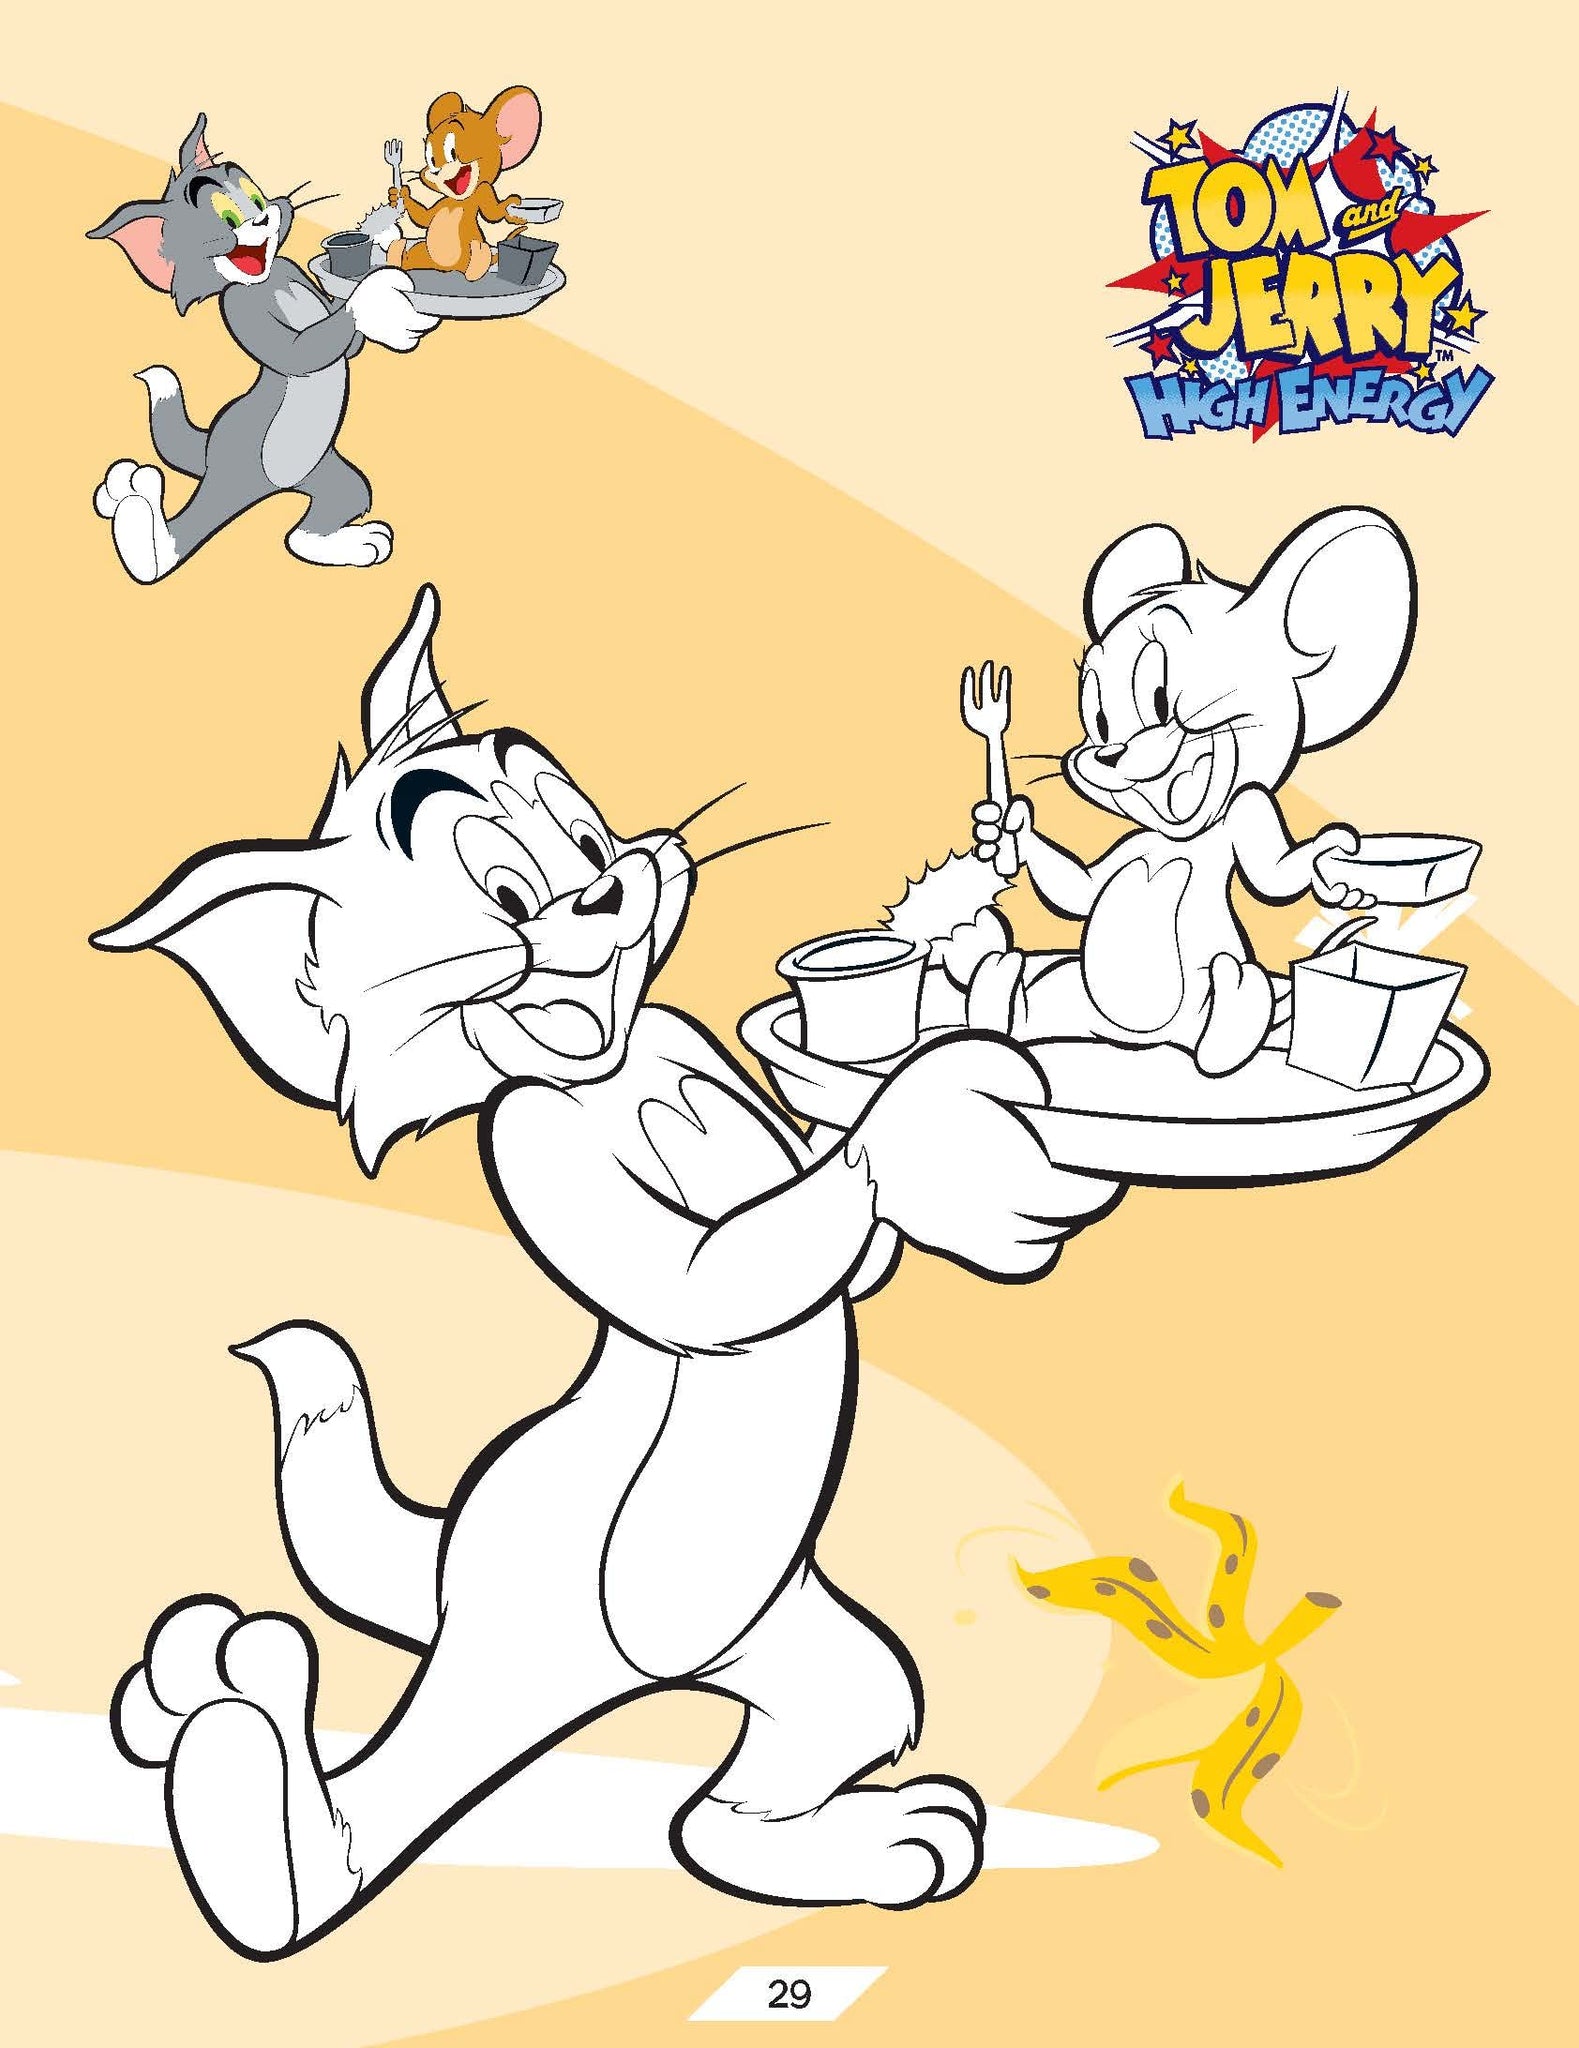 Tom and Jerry Colored by GoneOverDone on DeviantArt